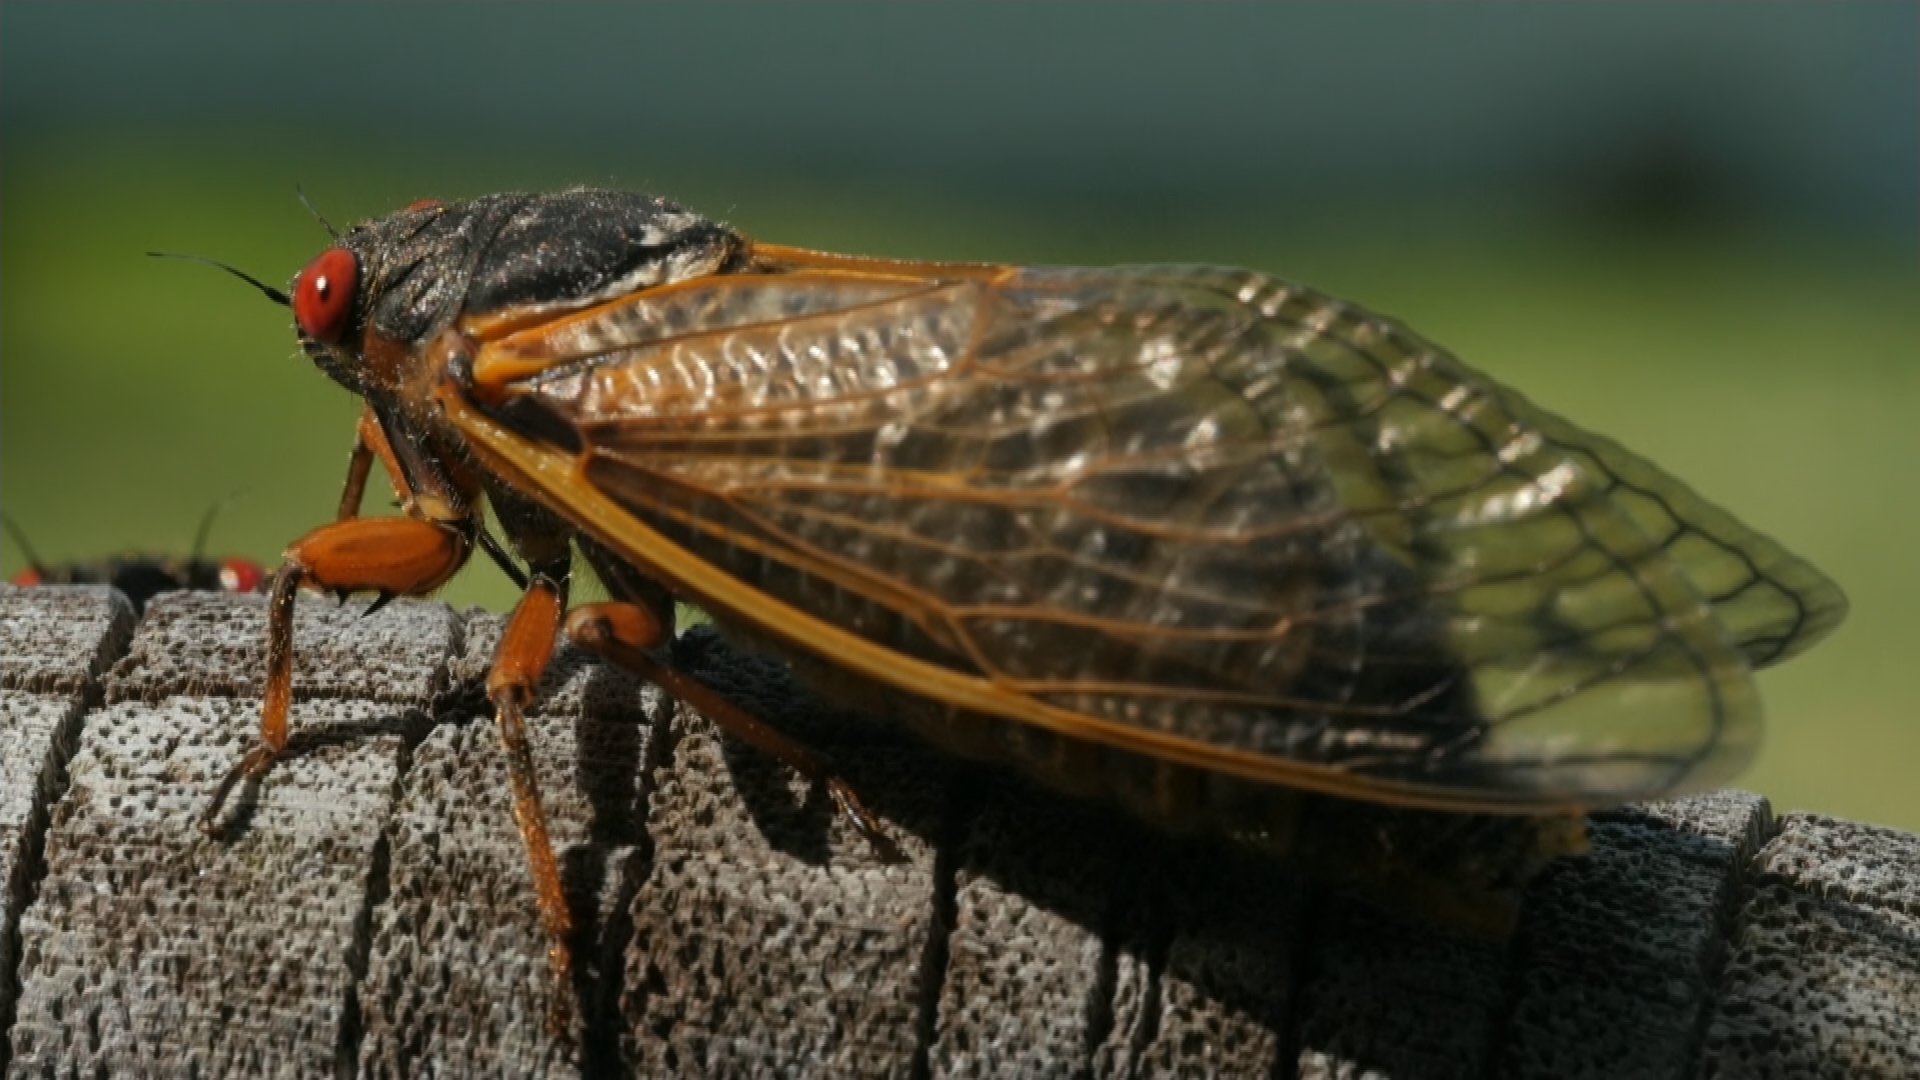 Trillions of Brood X cicadas emerge from the ground for first time in